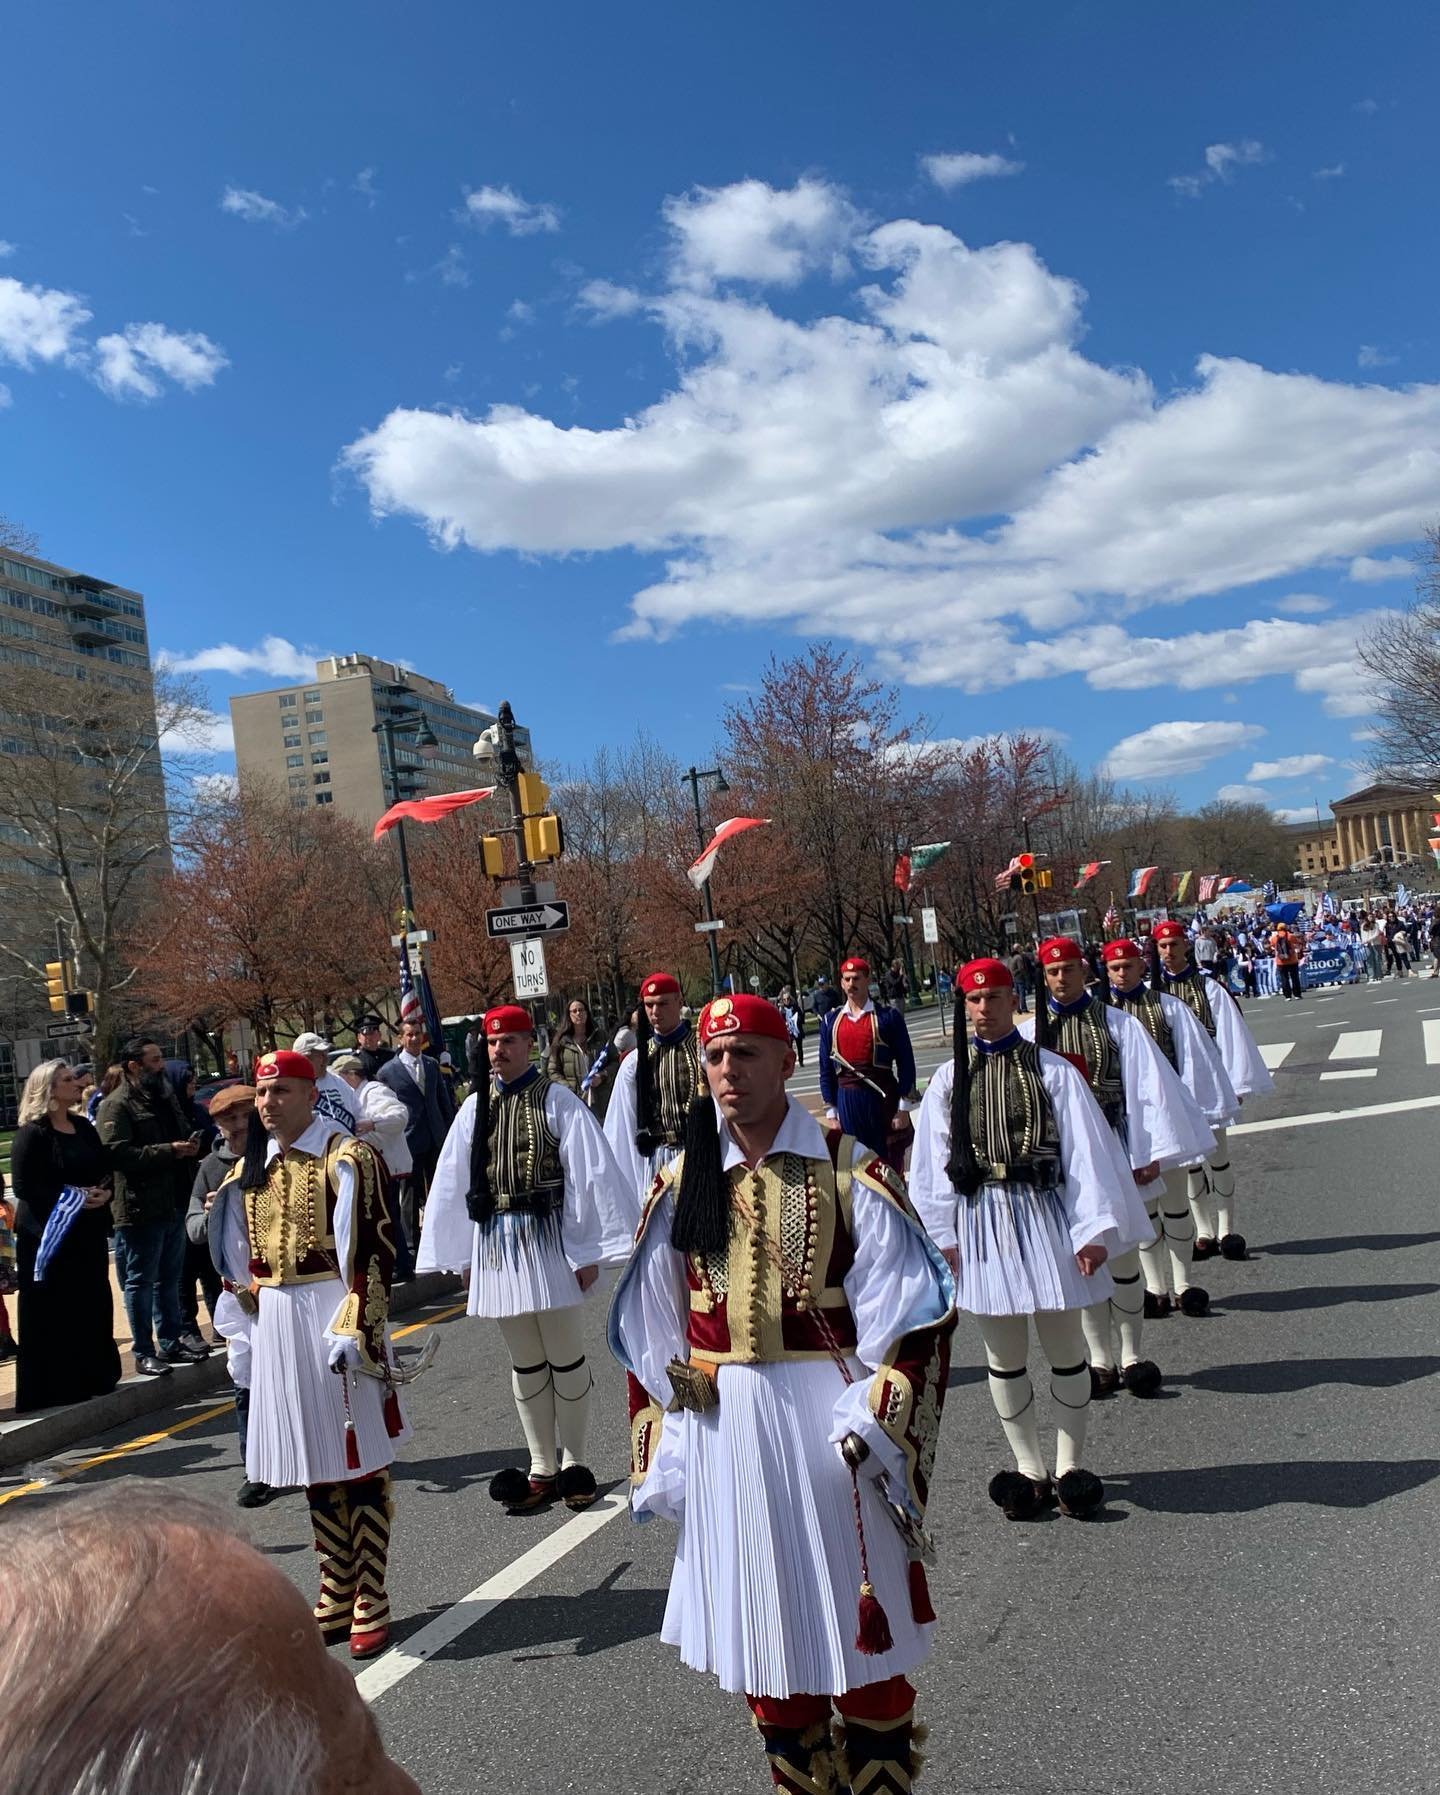  Greek Evzones marching at the Greek Independence Day parade in Philadelphia. 